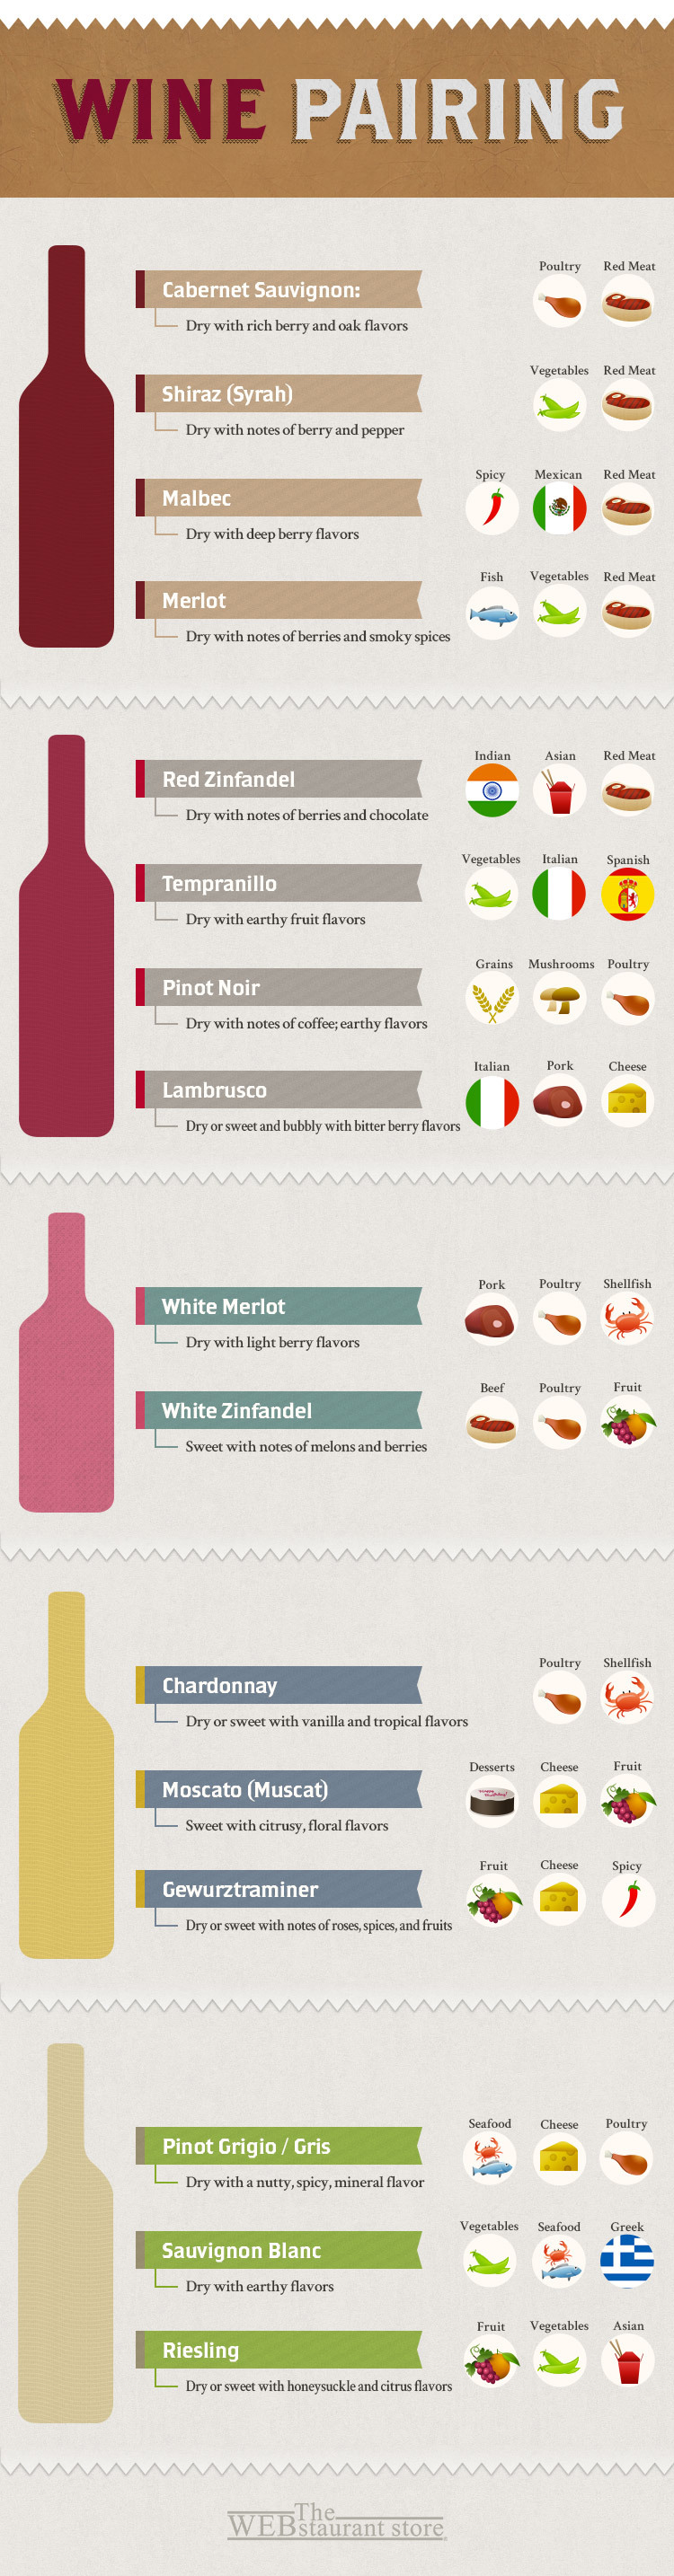 How To Build A Restaurant Wine List Common Types Of Wine,Ribs Temperature